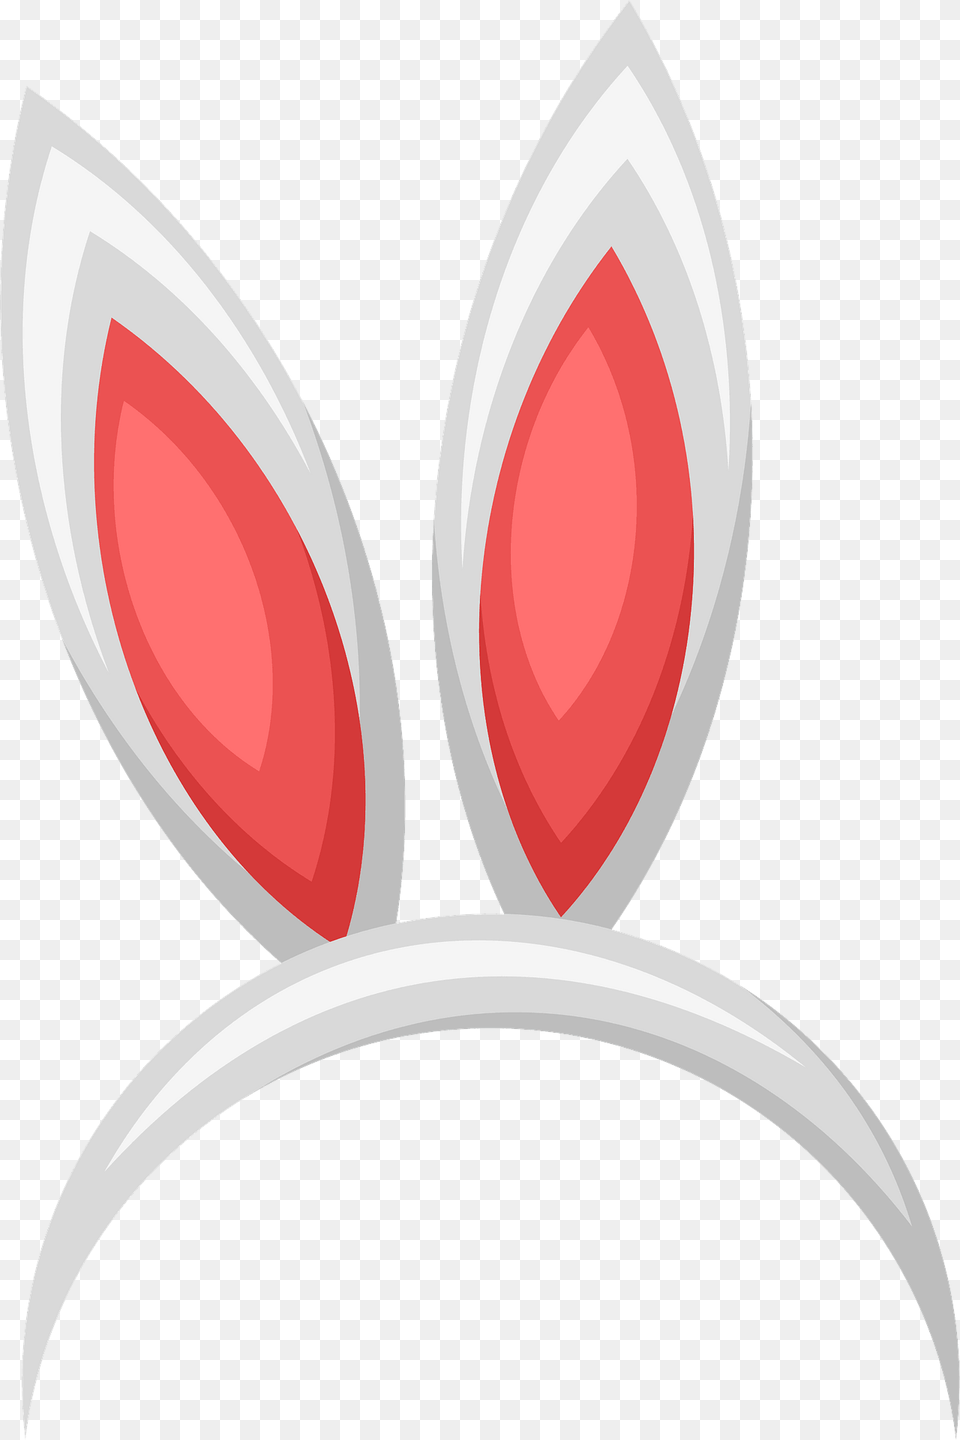 Bunny Ears Clipart, Cosmetics, Lipstick, Accessories, Jewelry Png Image